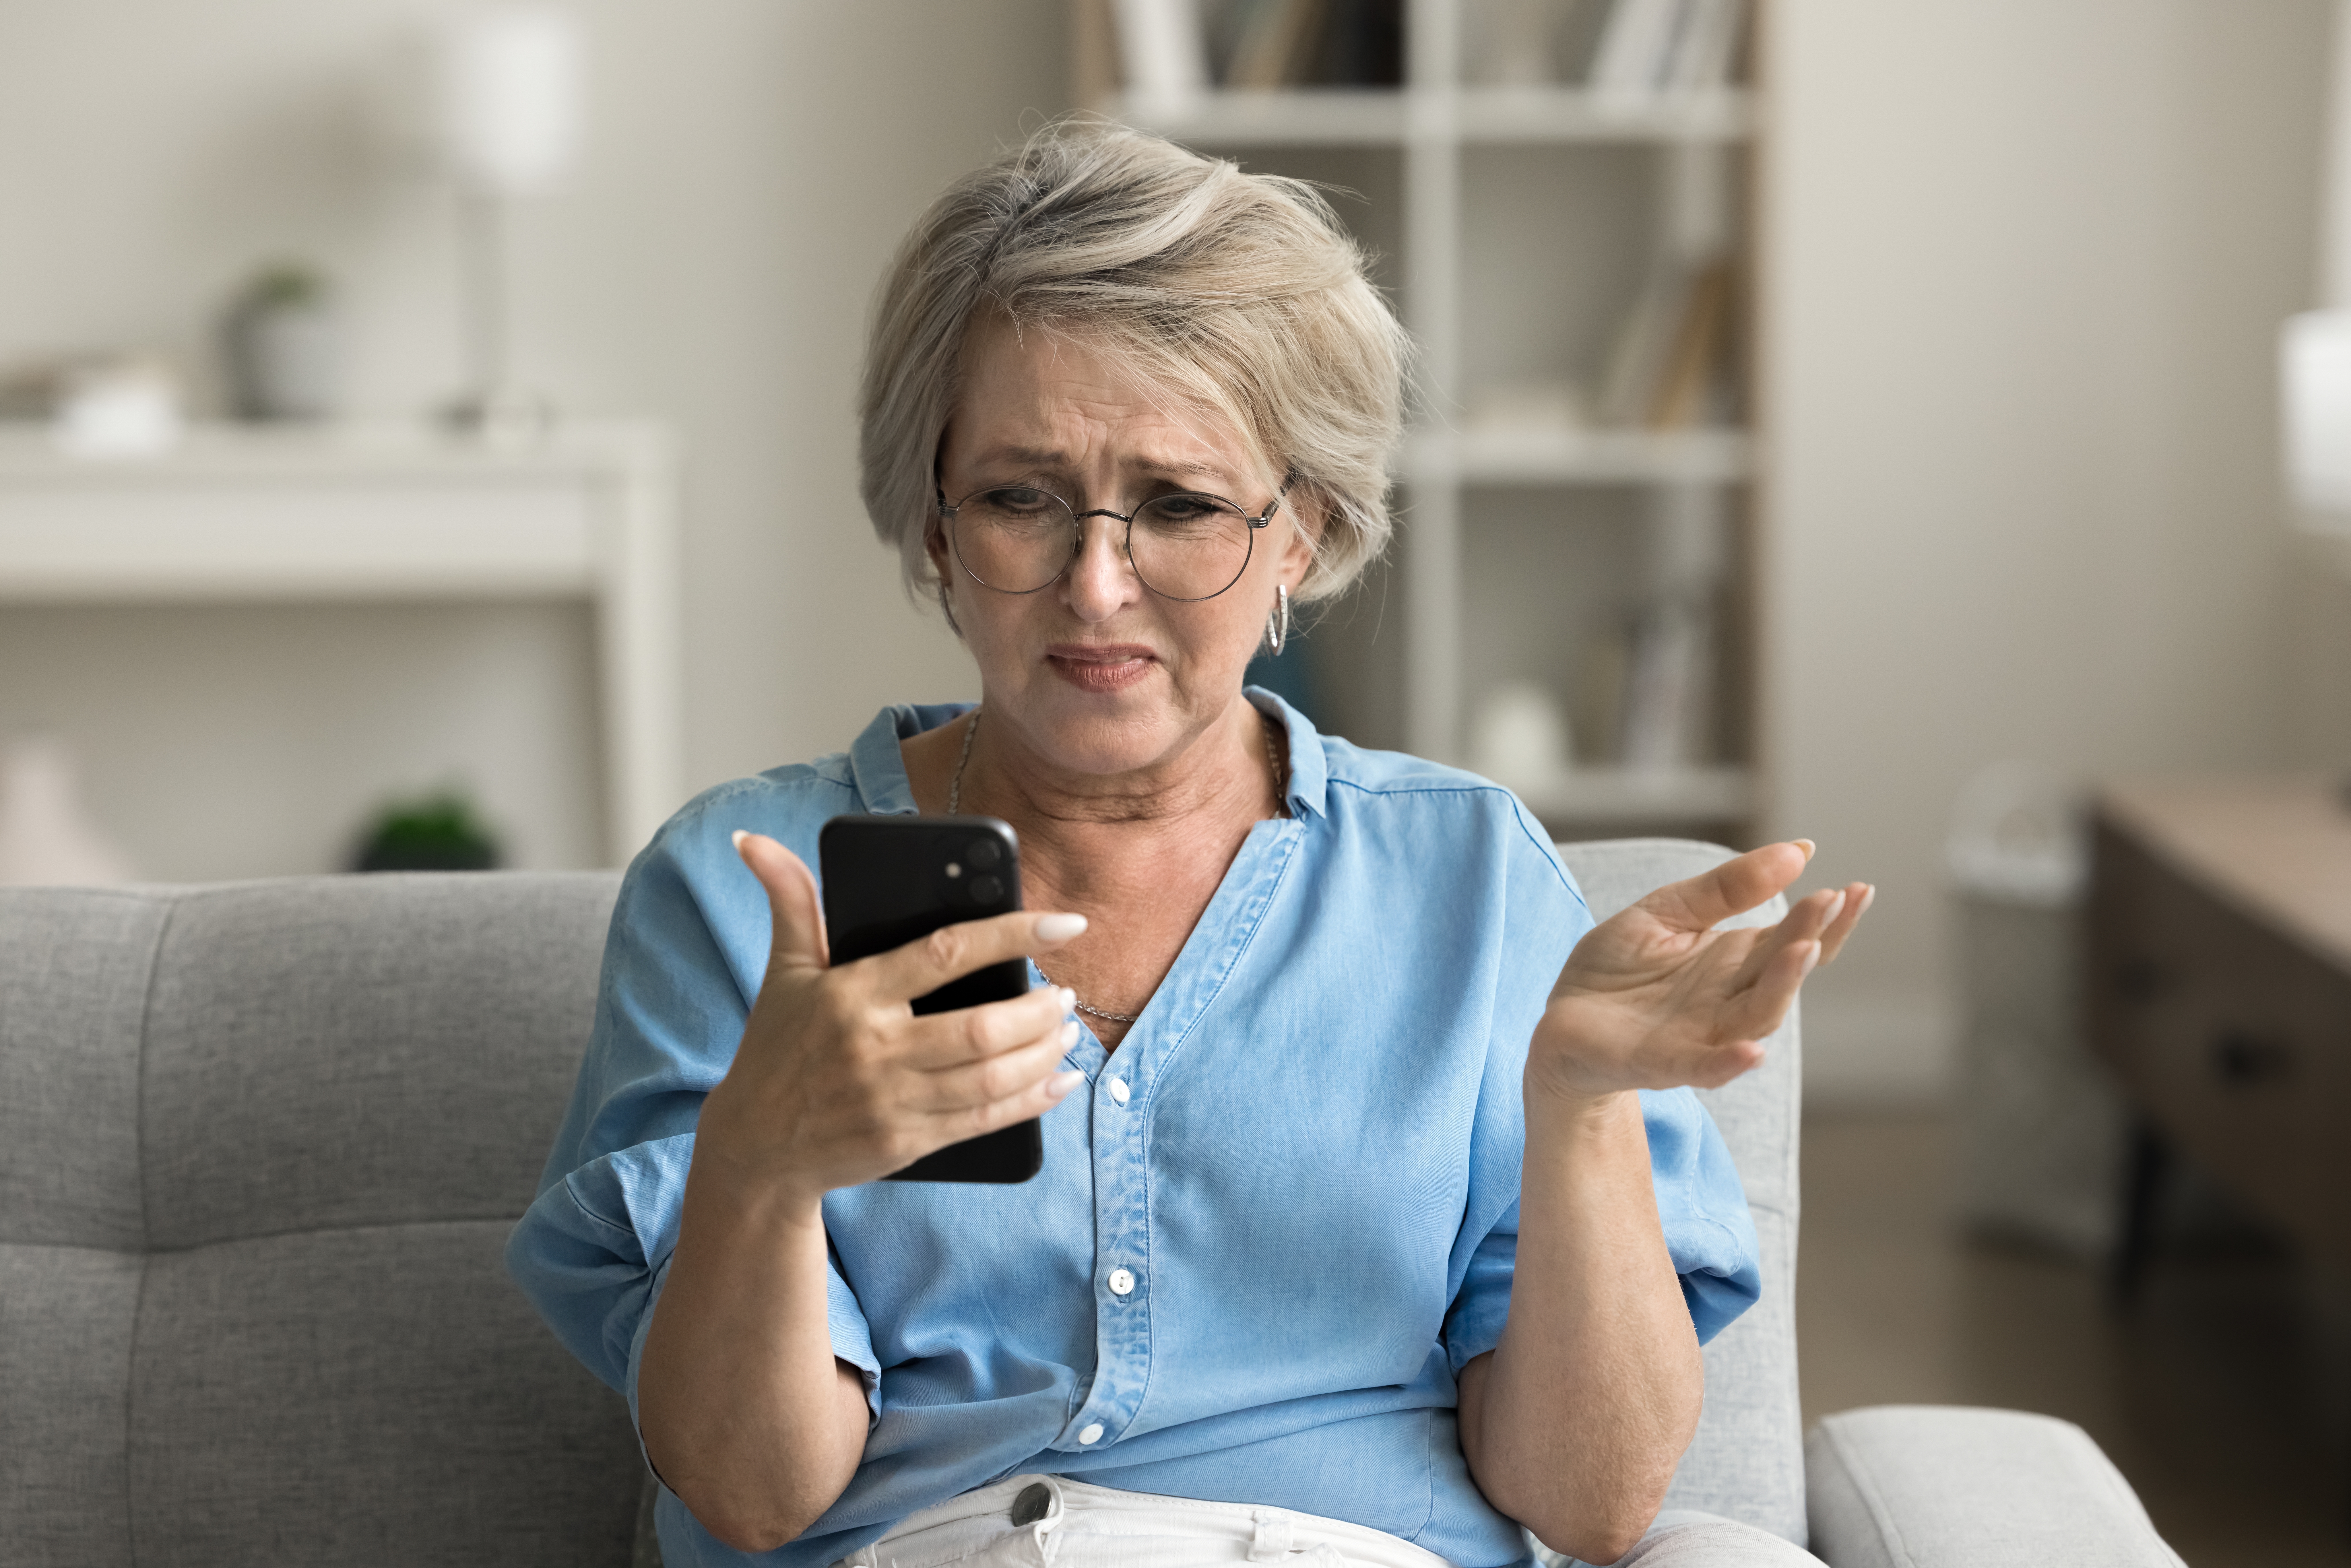 Frustrated senior woman seeing something upsetting on her phone | Source: Shutterstock